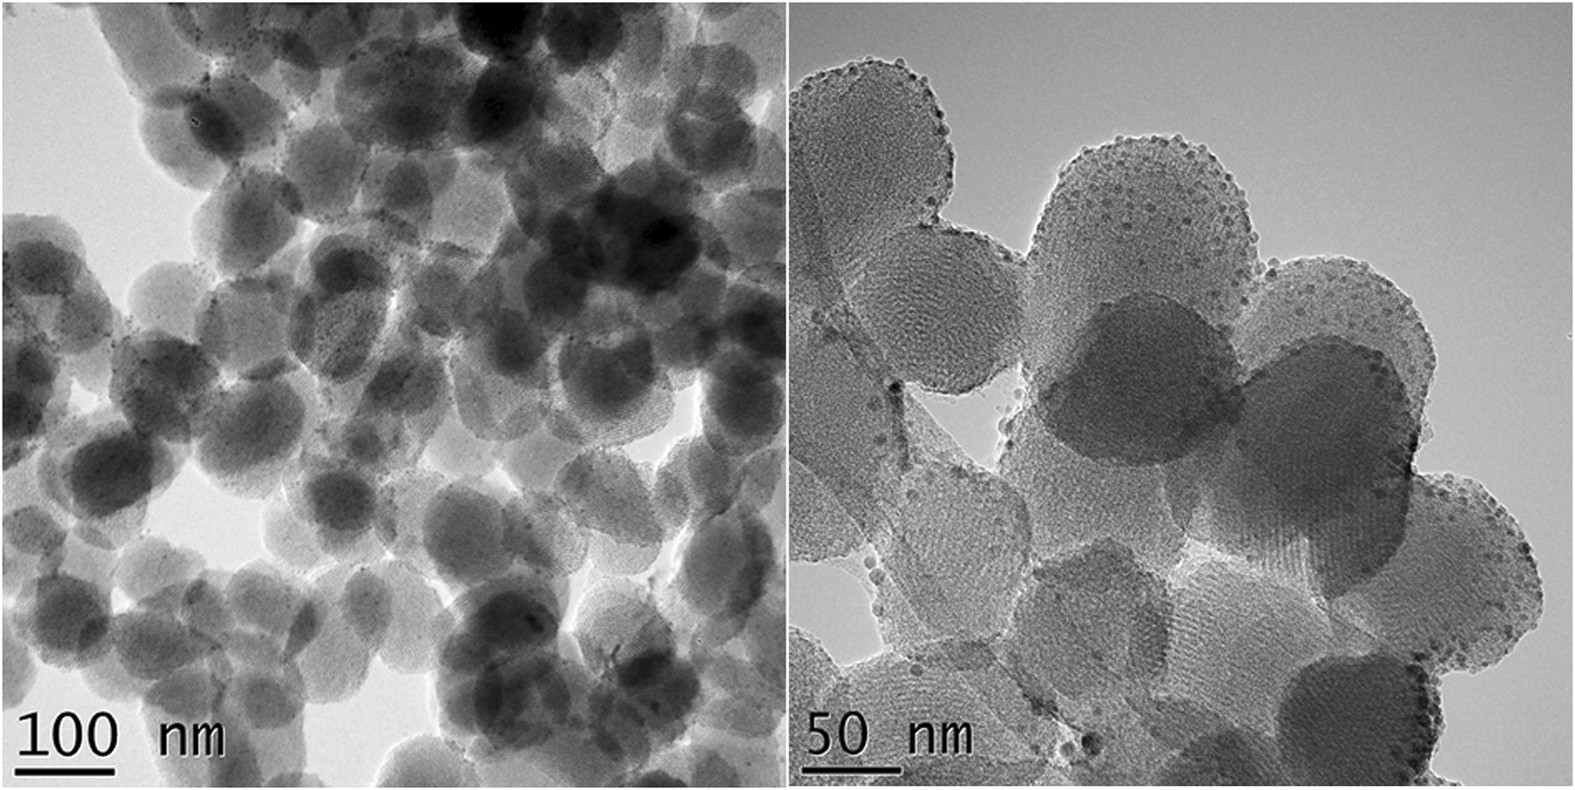 Supported Cu0 nanoparticles catalyst for controlled radical polymerization  reaction and block-copolymer synthesis | Scientific Reports